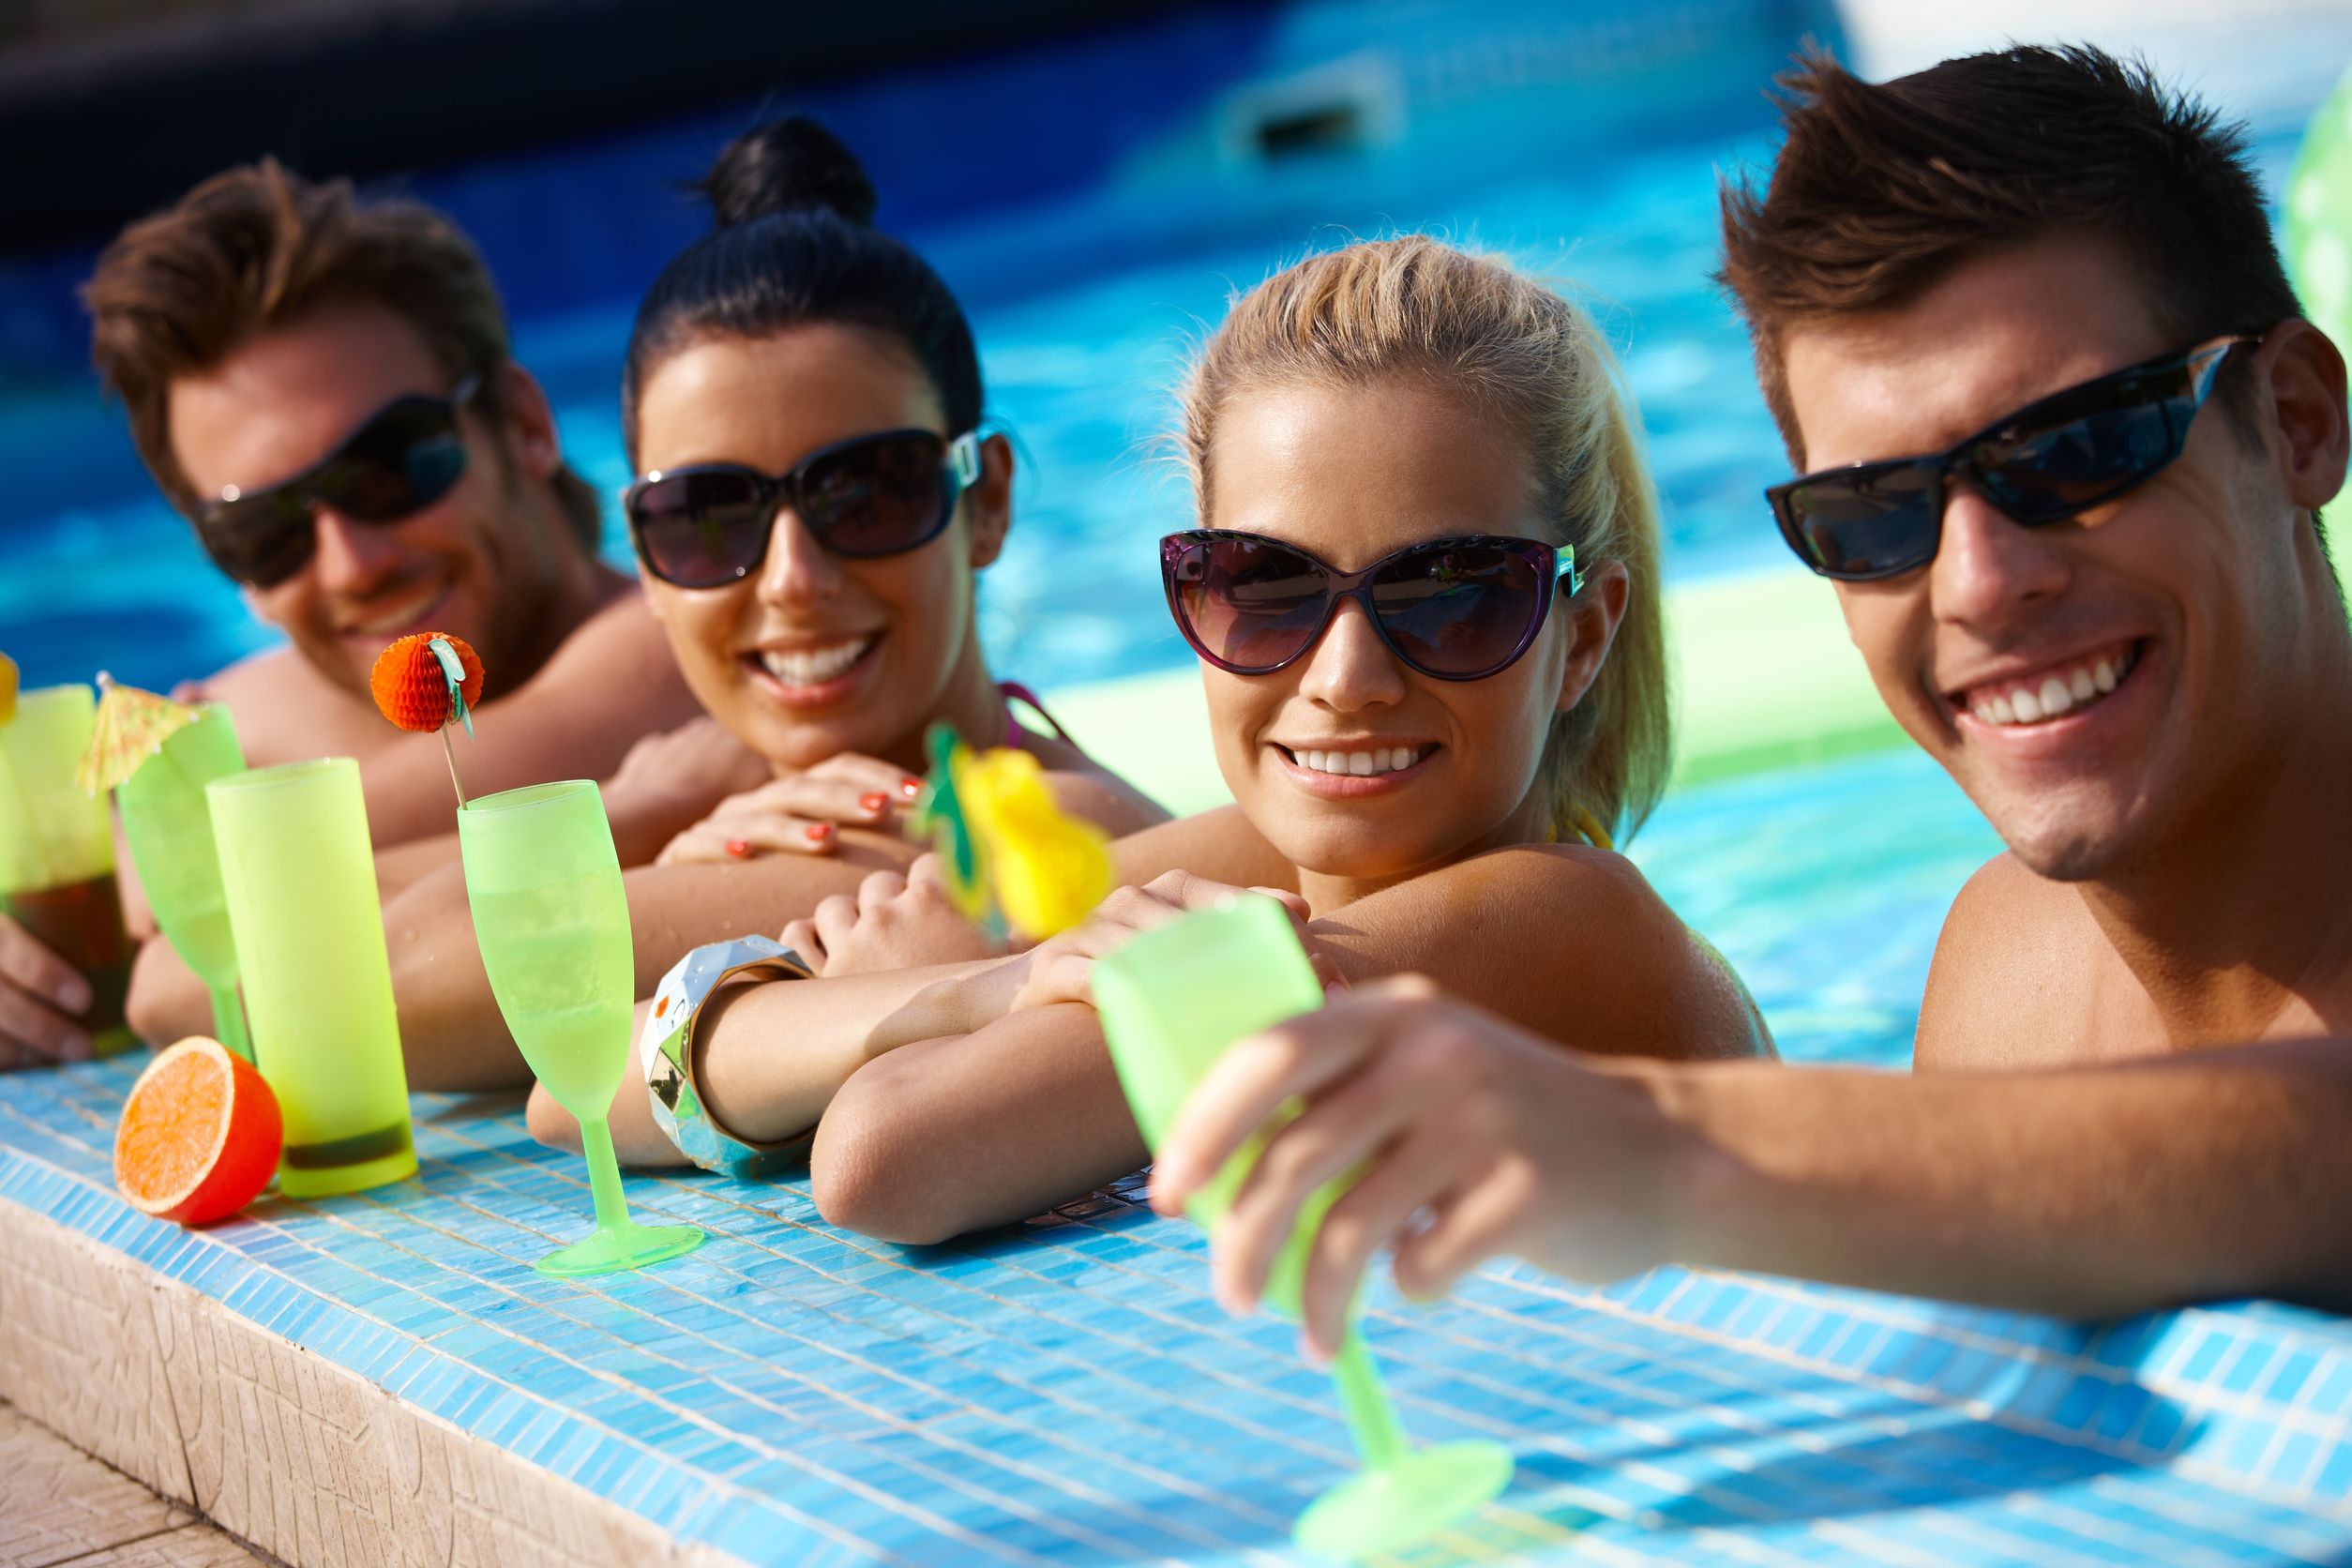 Adult Pool Party Ideas for Themes, Games, and Decorations